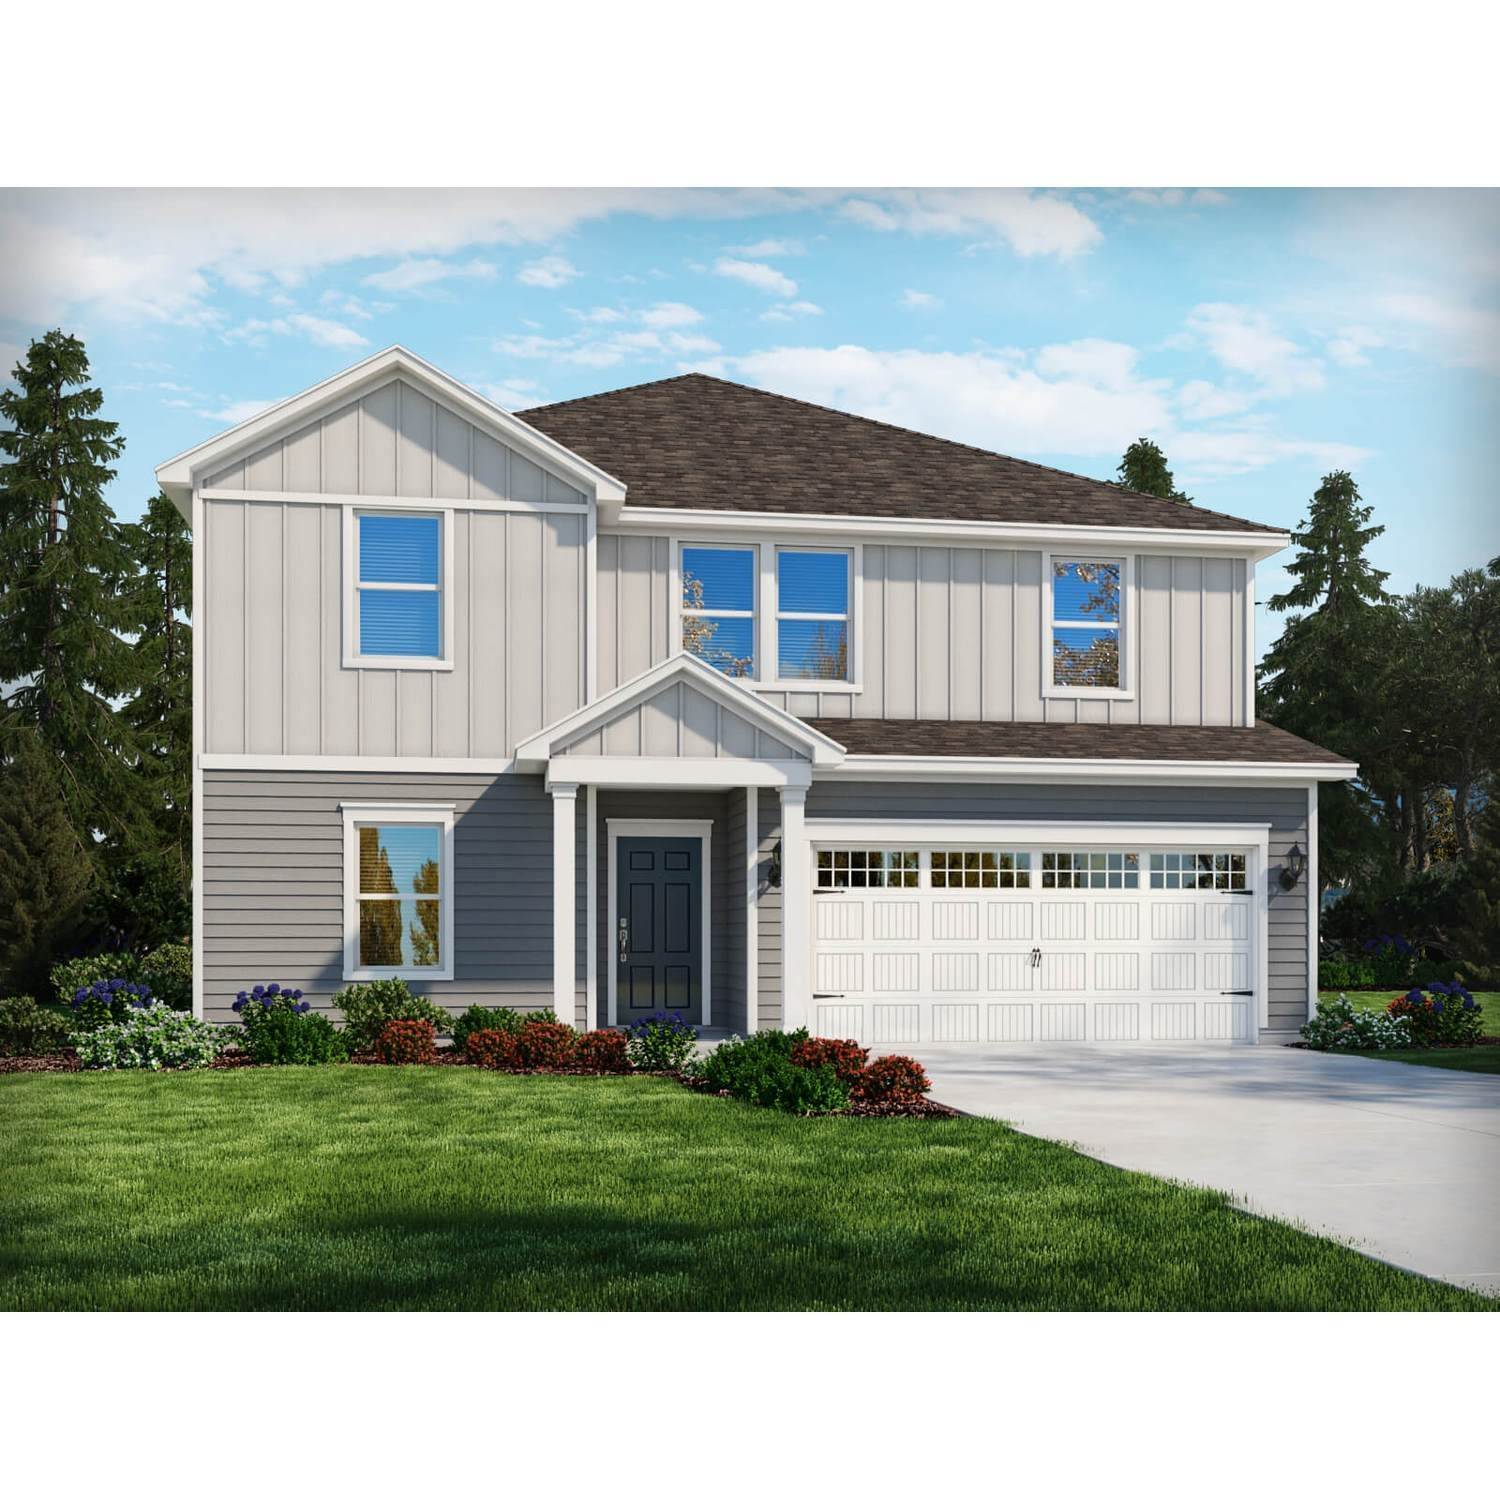 Single Family for Sale at Raleigh, NC 27616